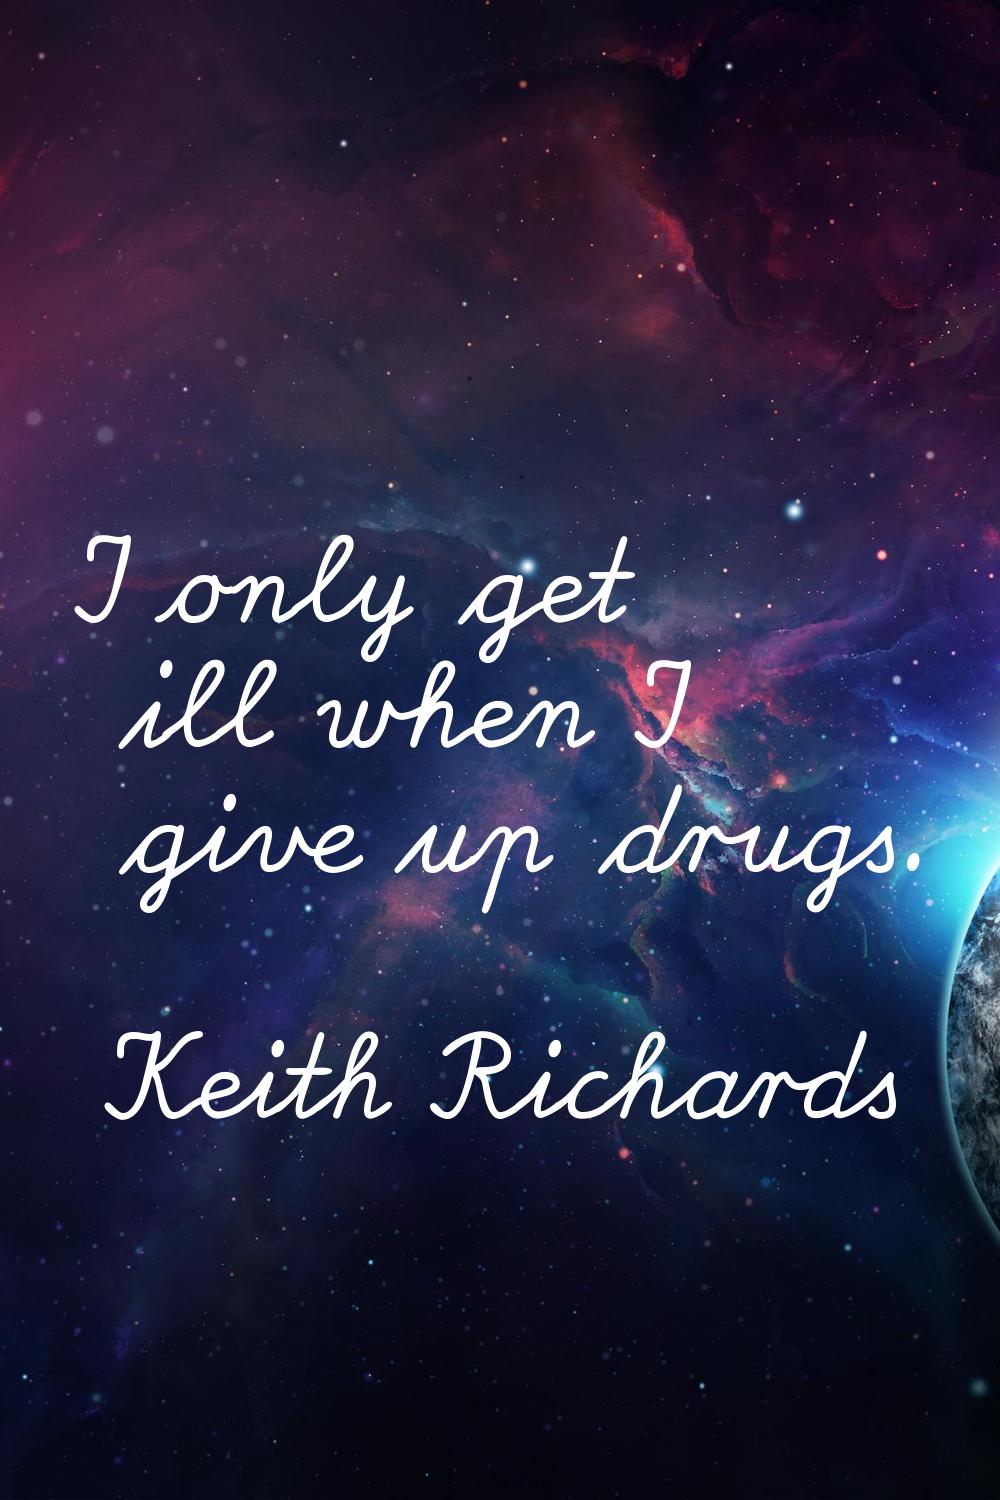 I only get ill when I give up drugs.